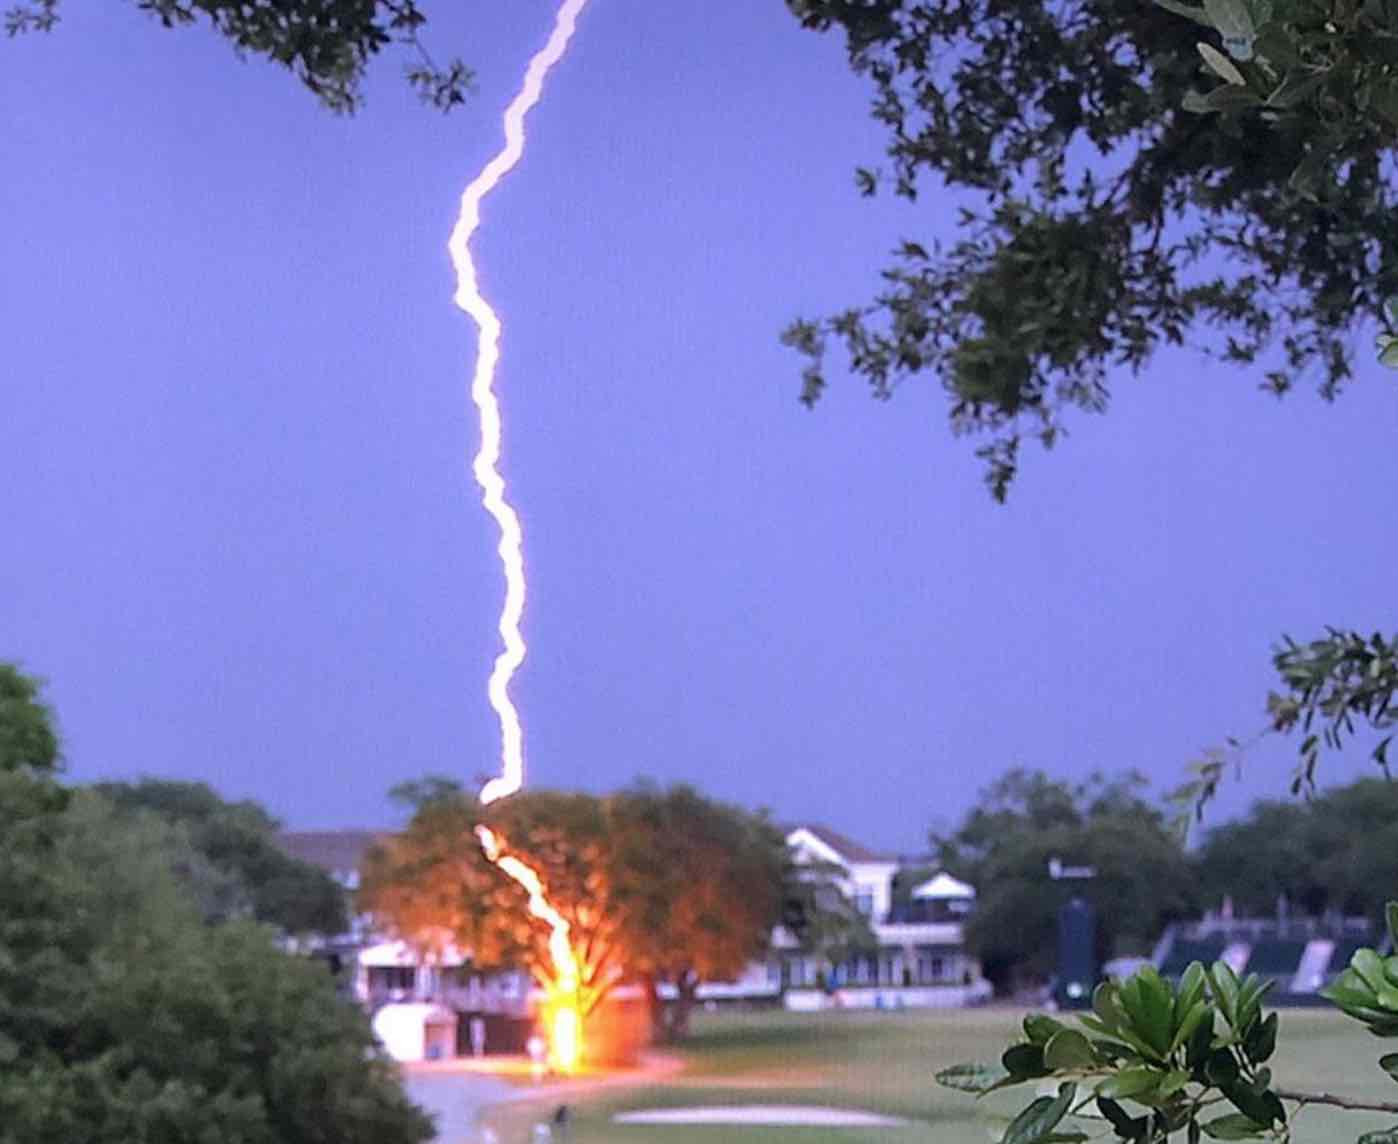 Watch the insane lightning bolt that struck a tree off the 18th hole at